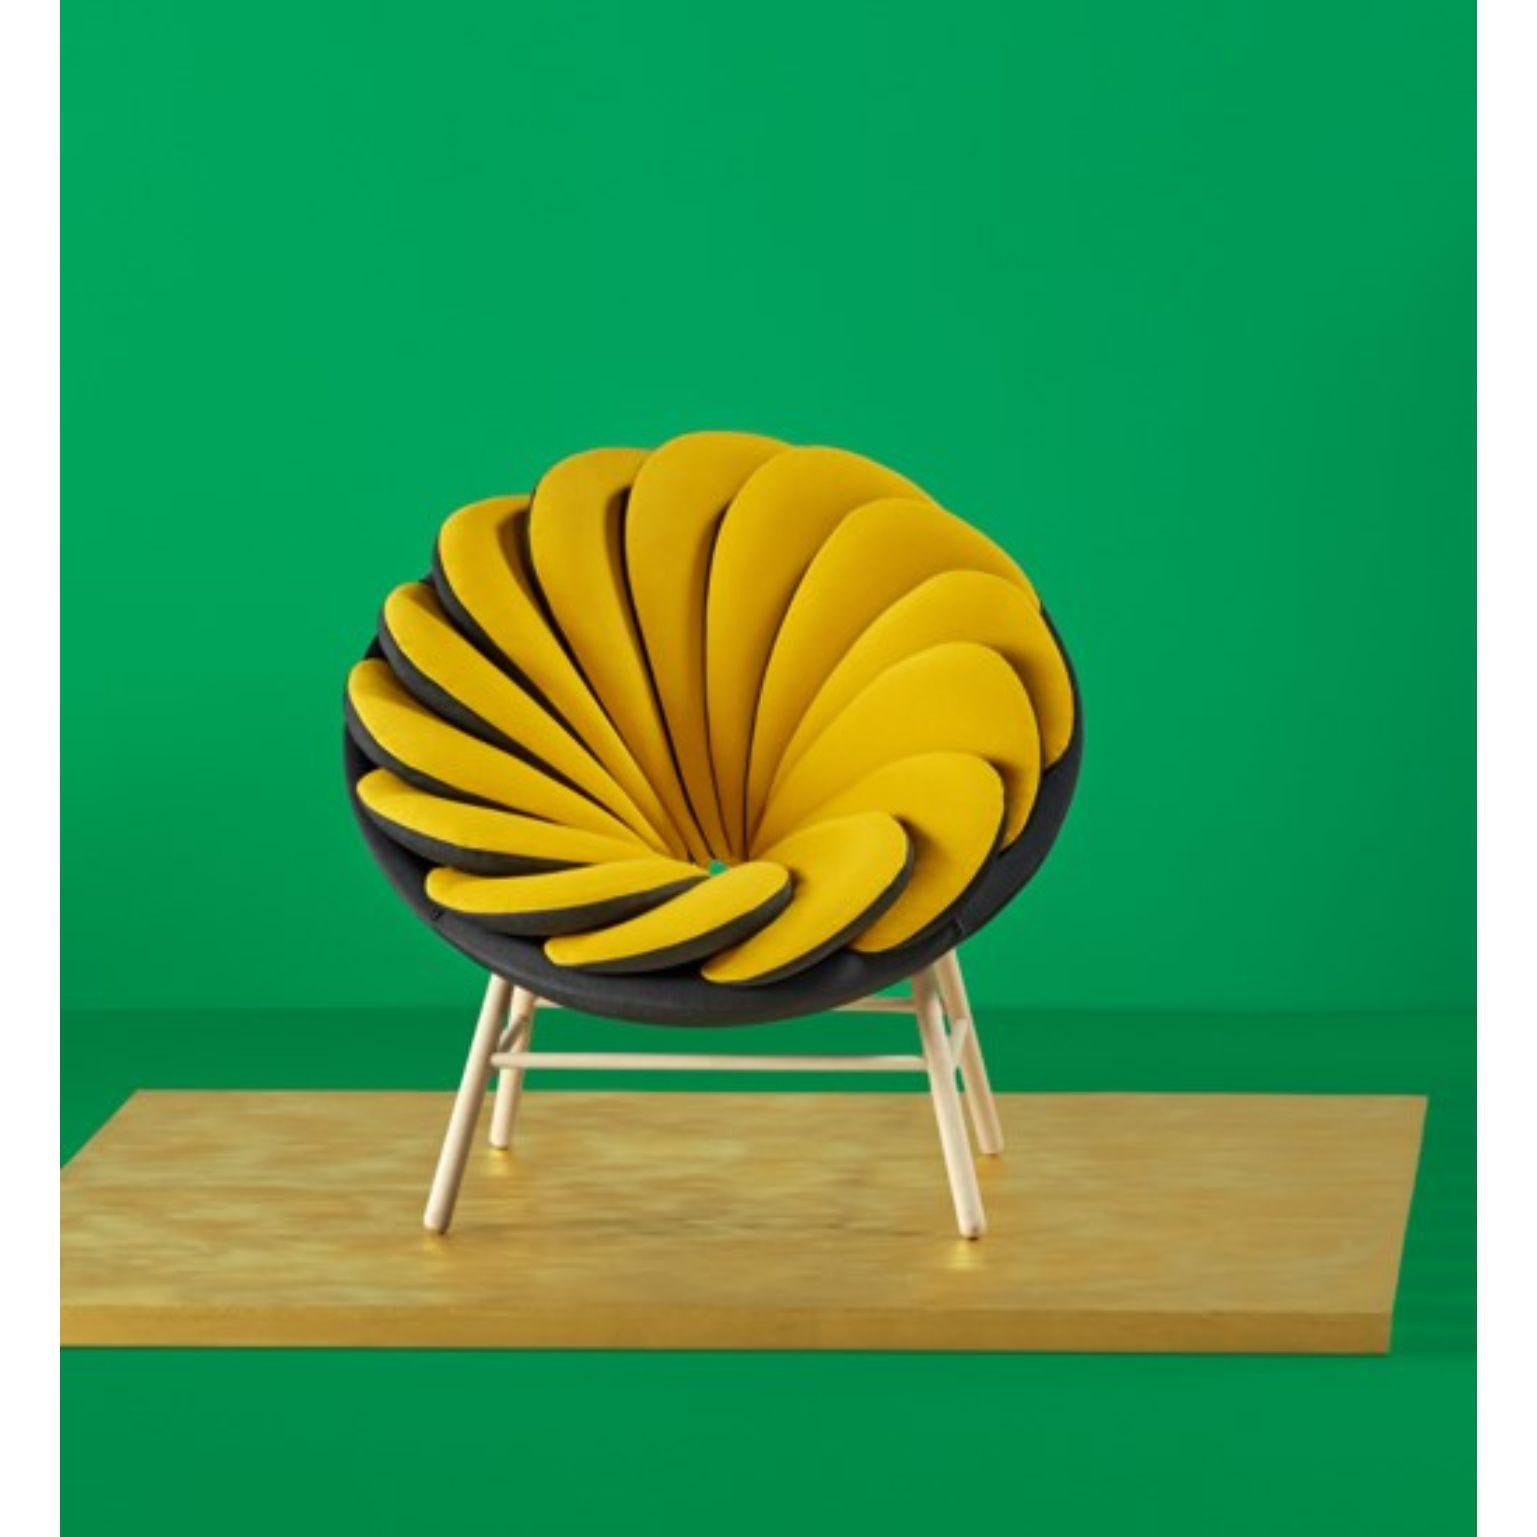 Quetzal armchair - yellow by Marc Venot
Dimensions: W100, D100, H90, Seat 42
Materials: Iron structure
Foam CMHR (high resilience and flame retardant) for all our cushion filling systems
Wooden legs

Quetzal is a very visual armchair giving to